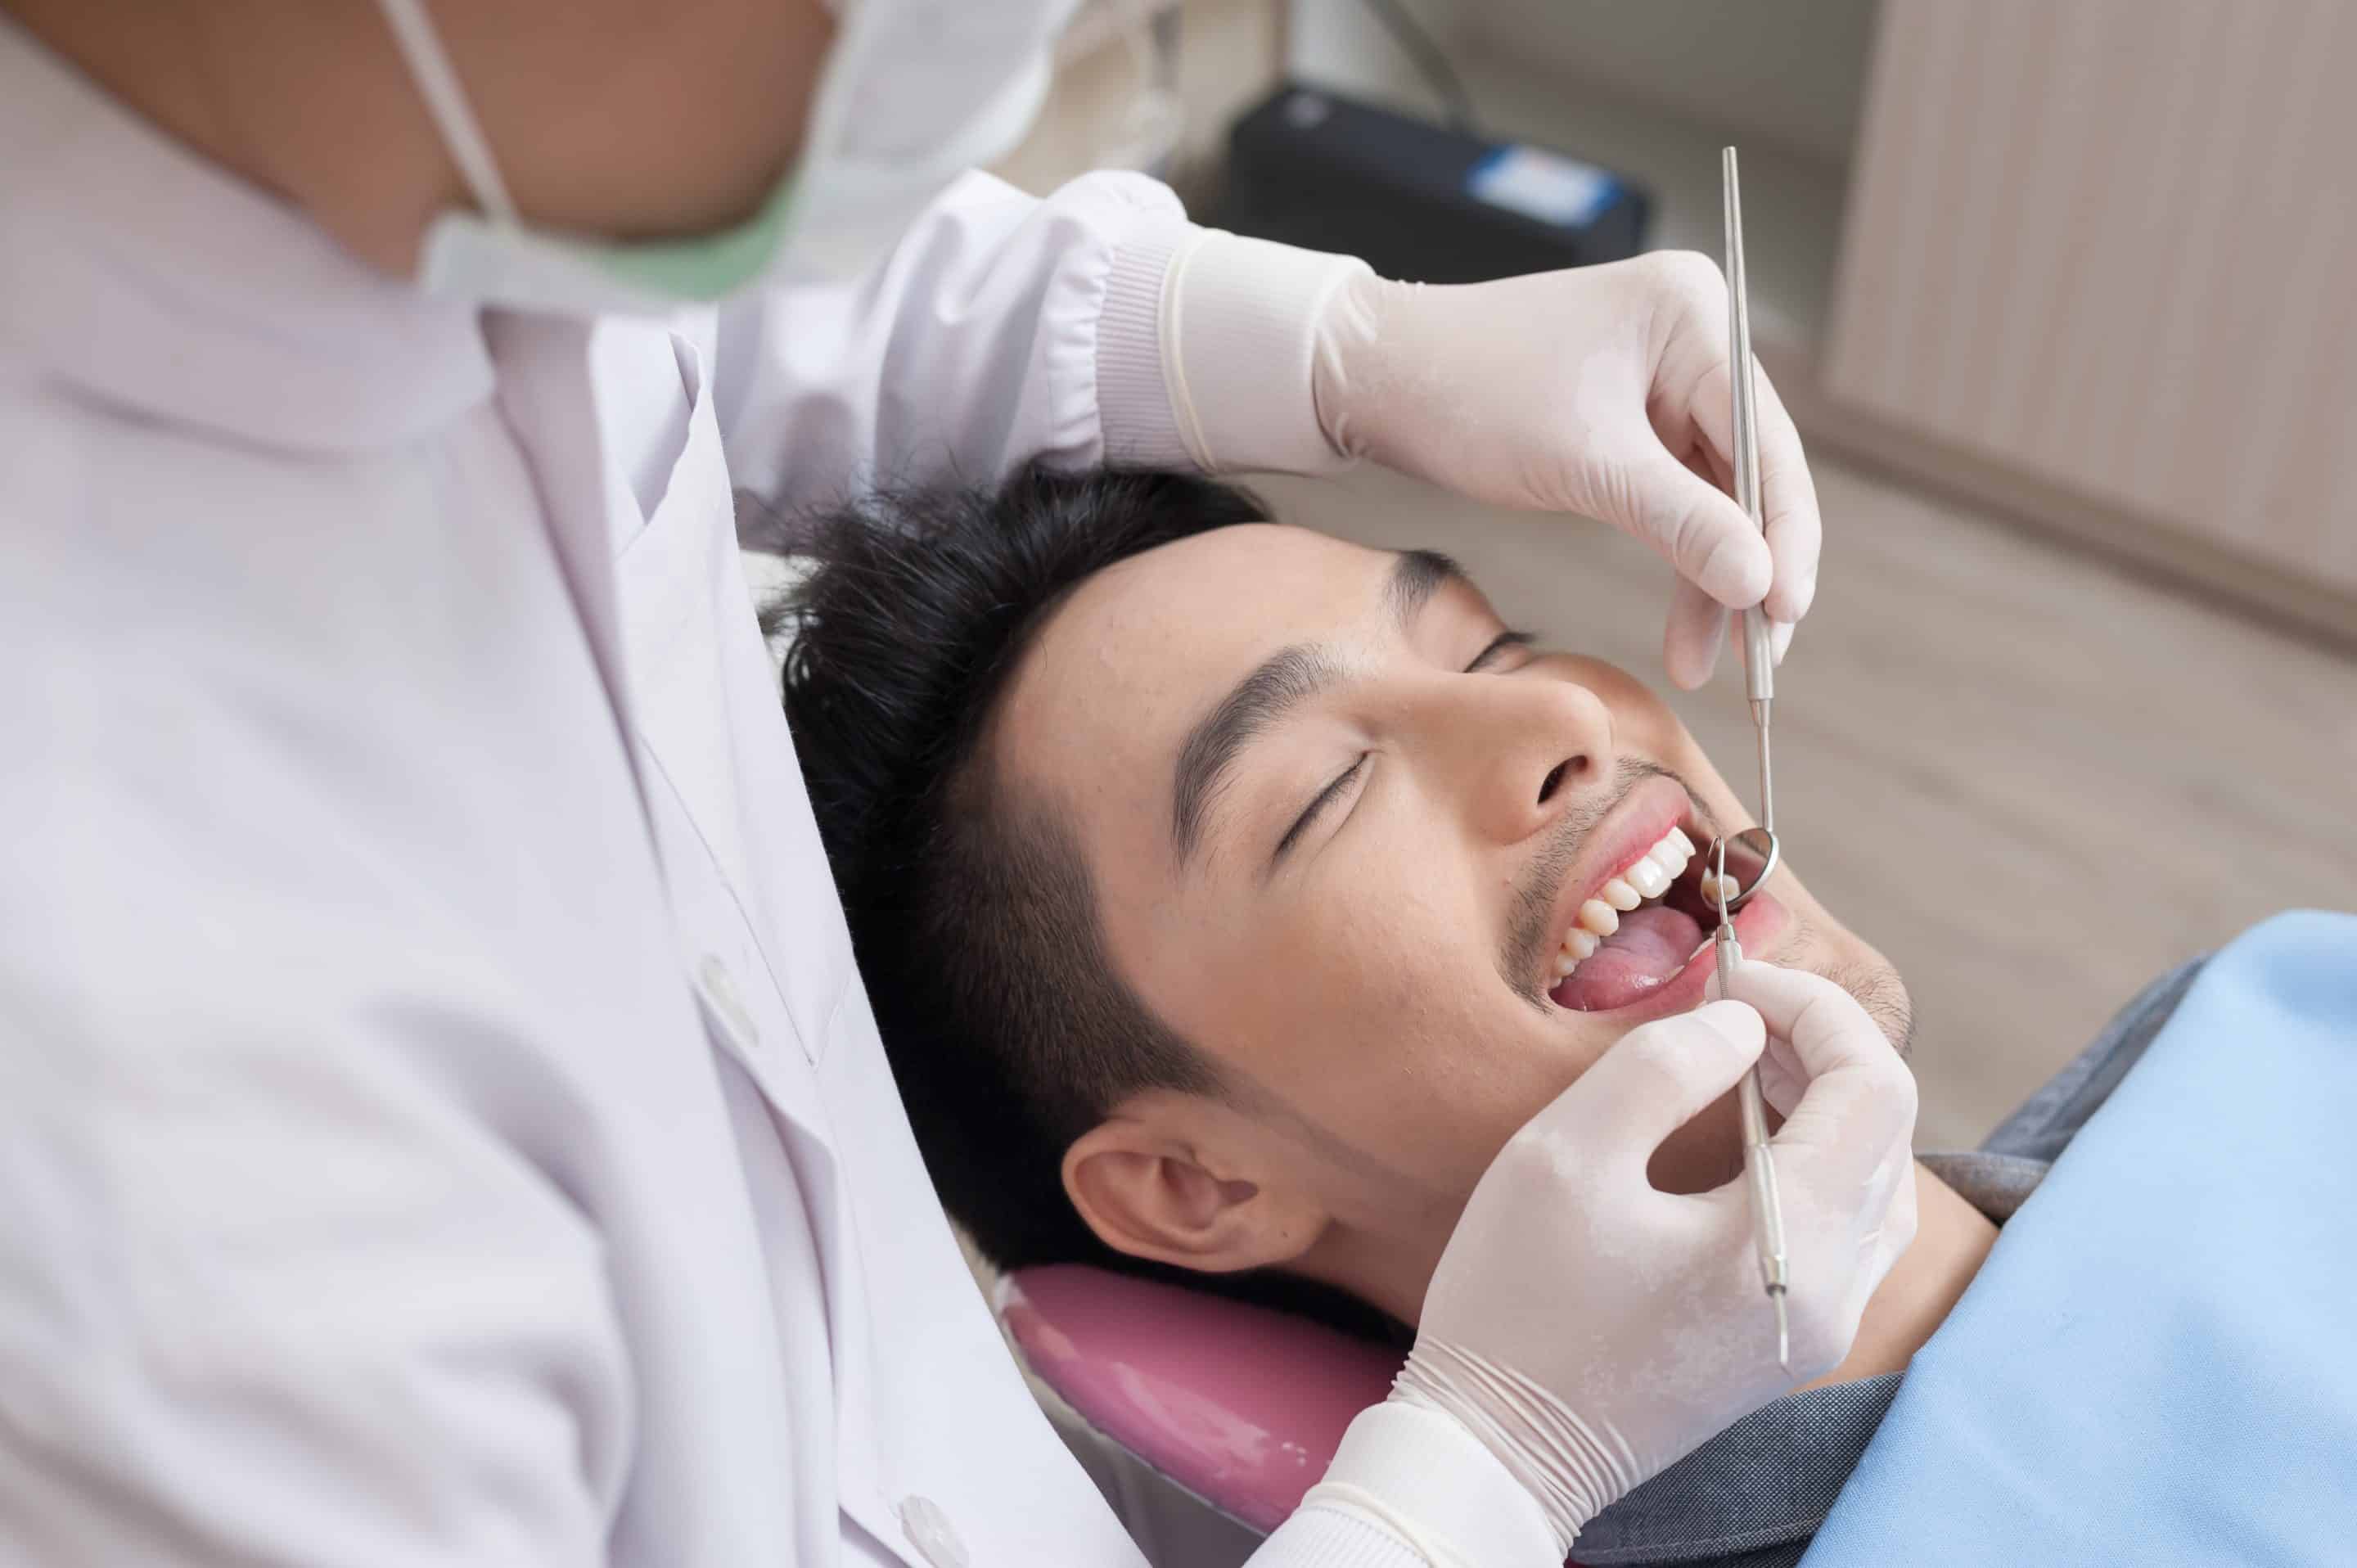 Patient at root canal treatment appointment